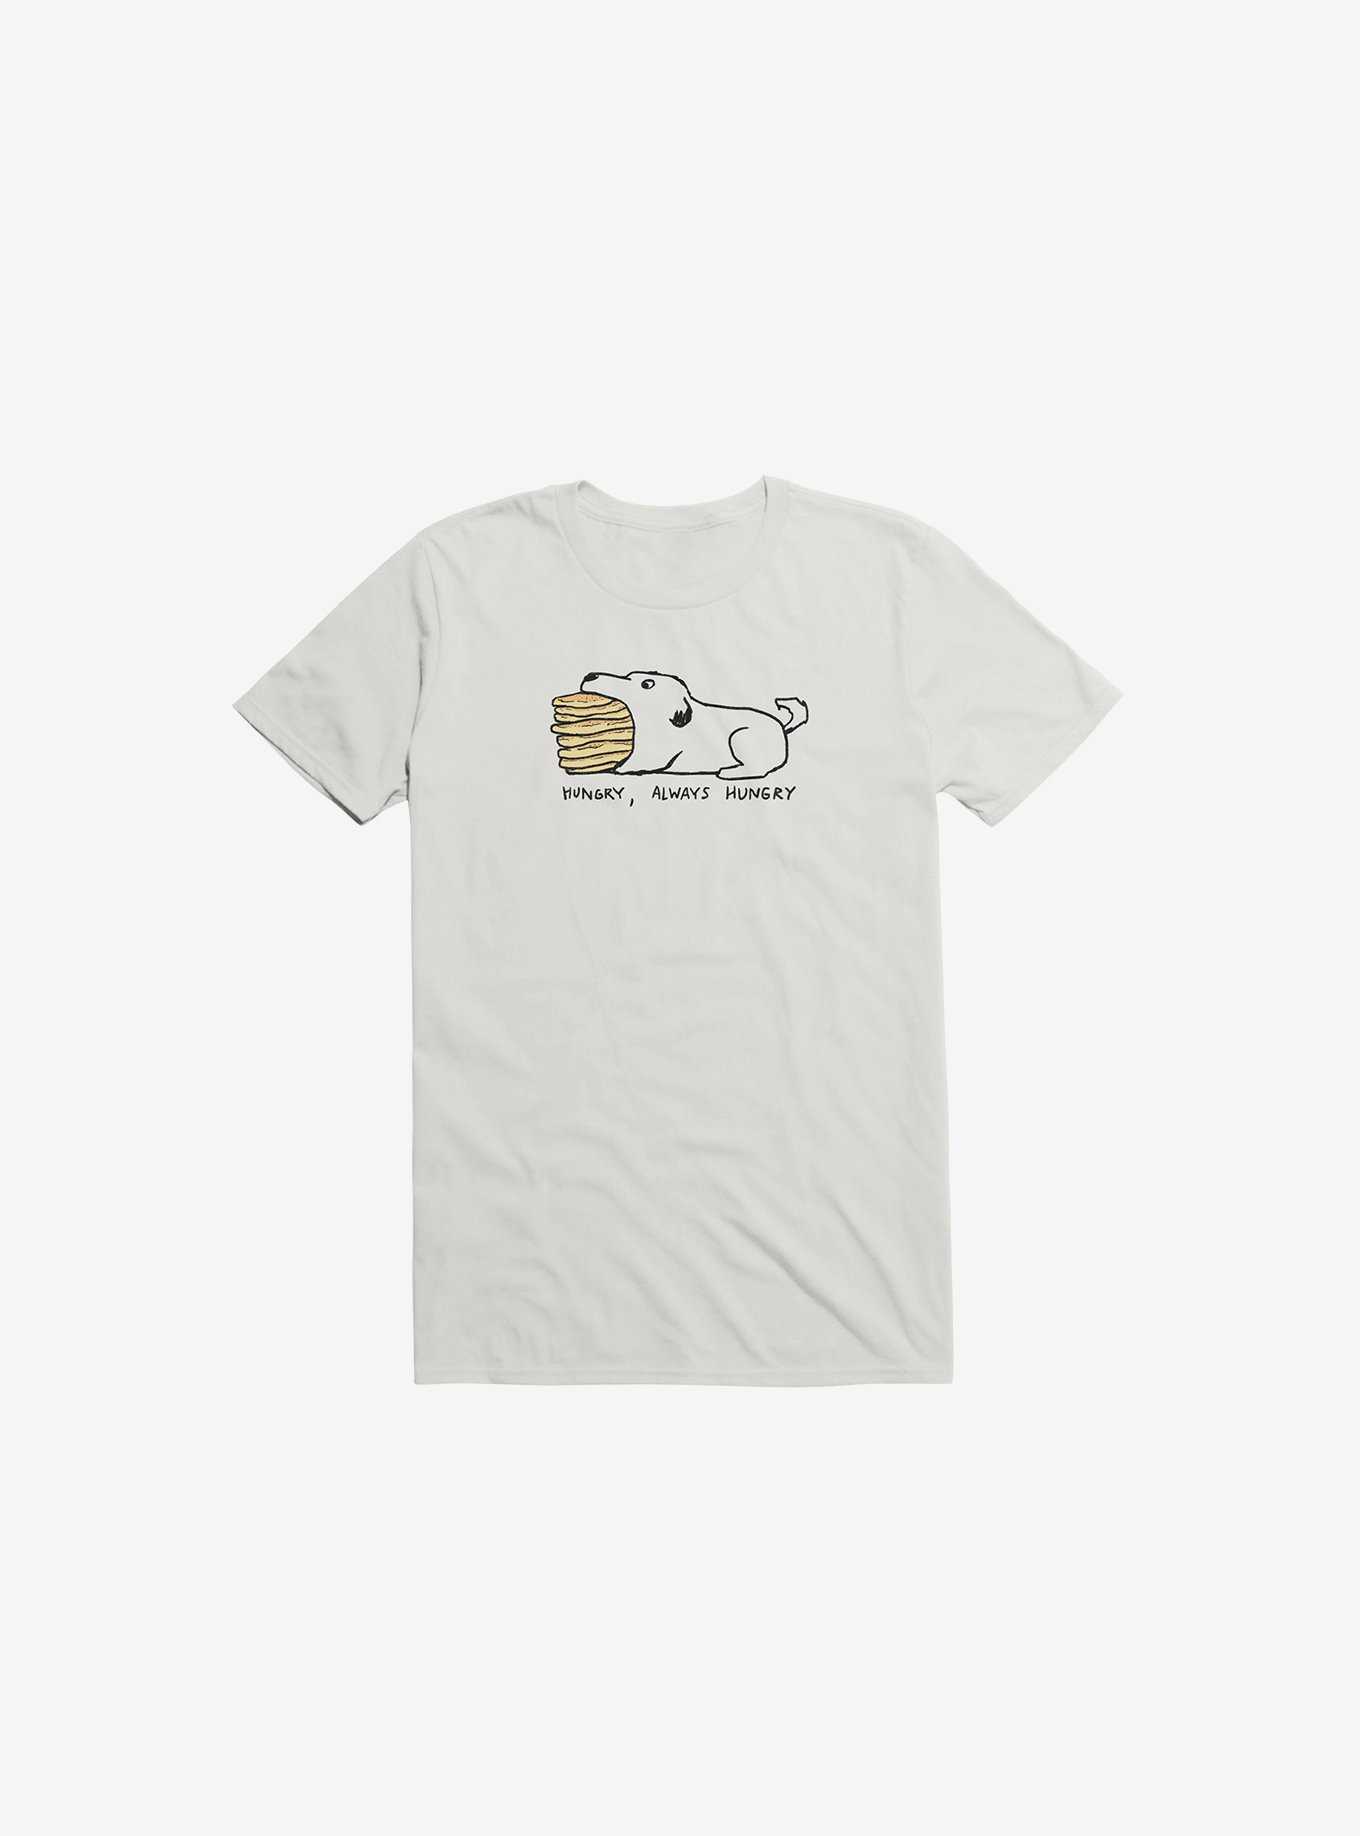 Hungry, Always Hungry T-Shirt, , hi-res